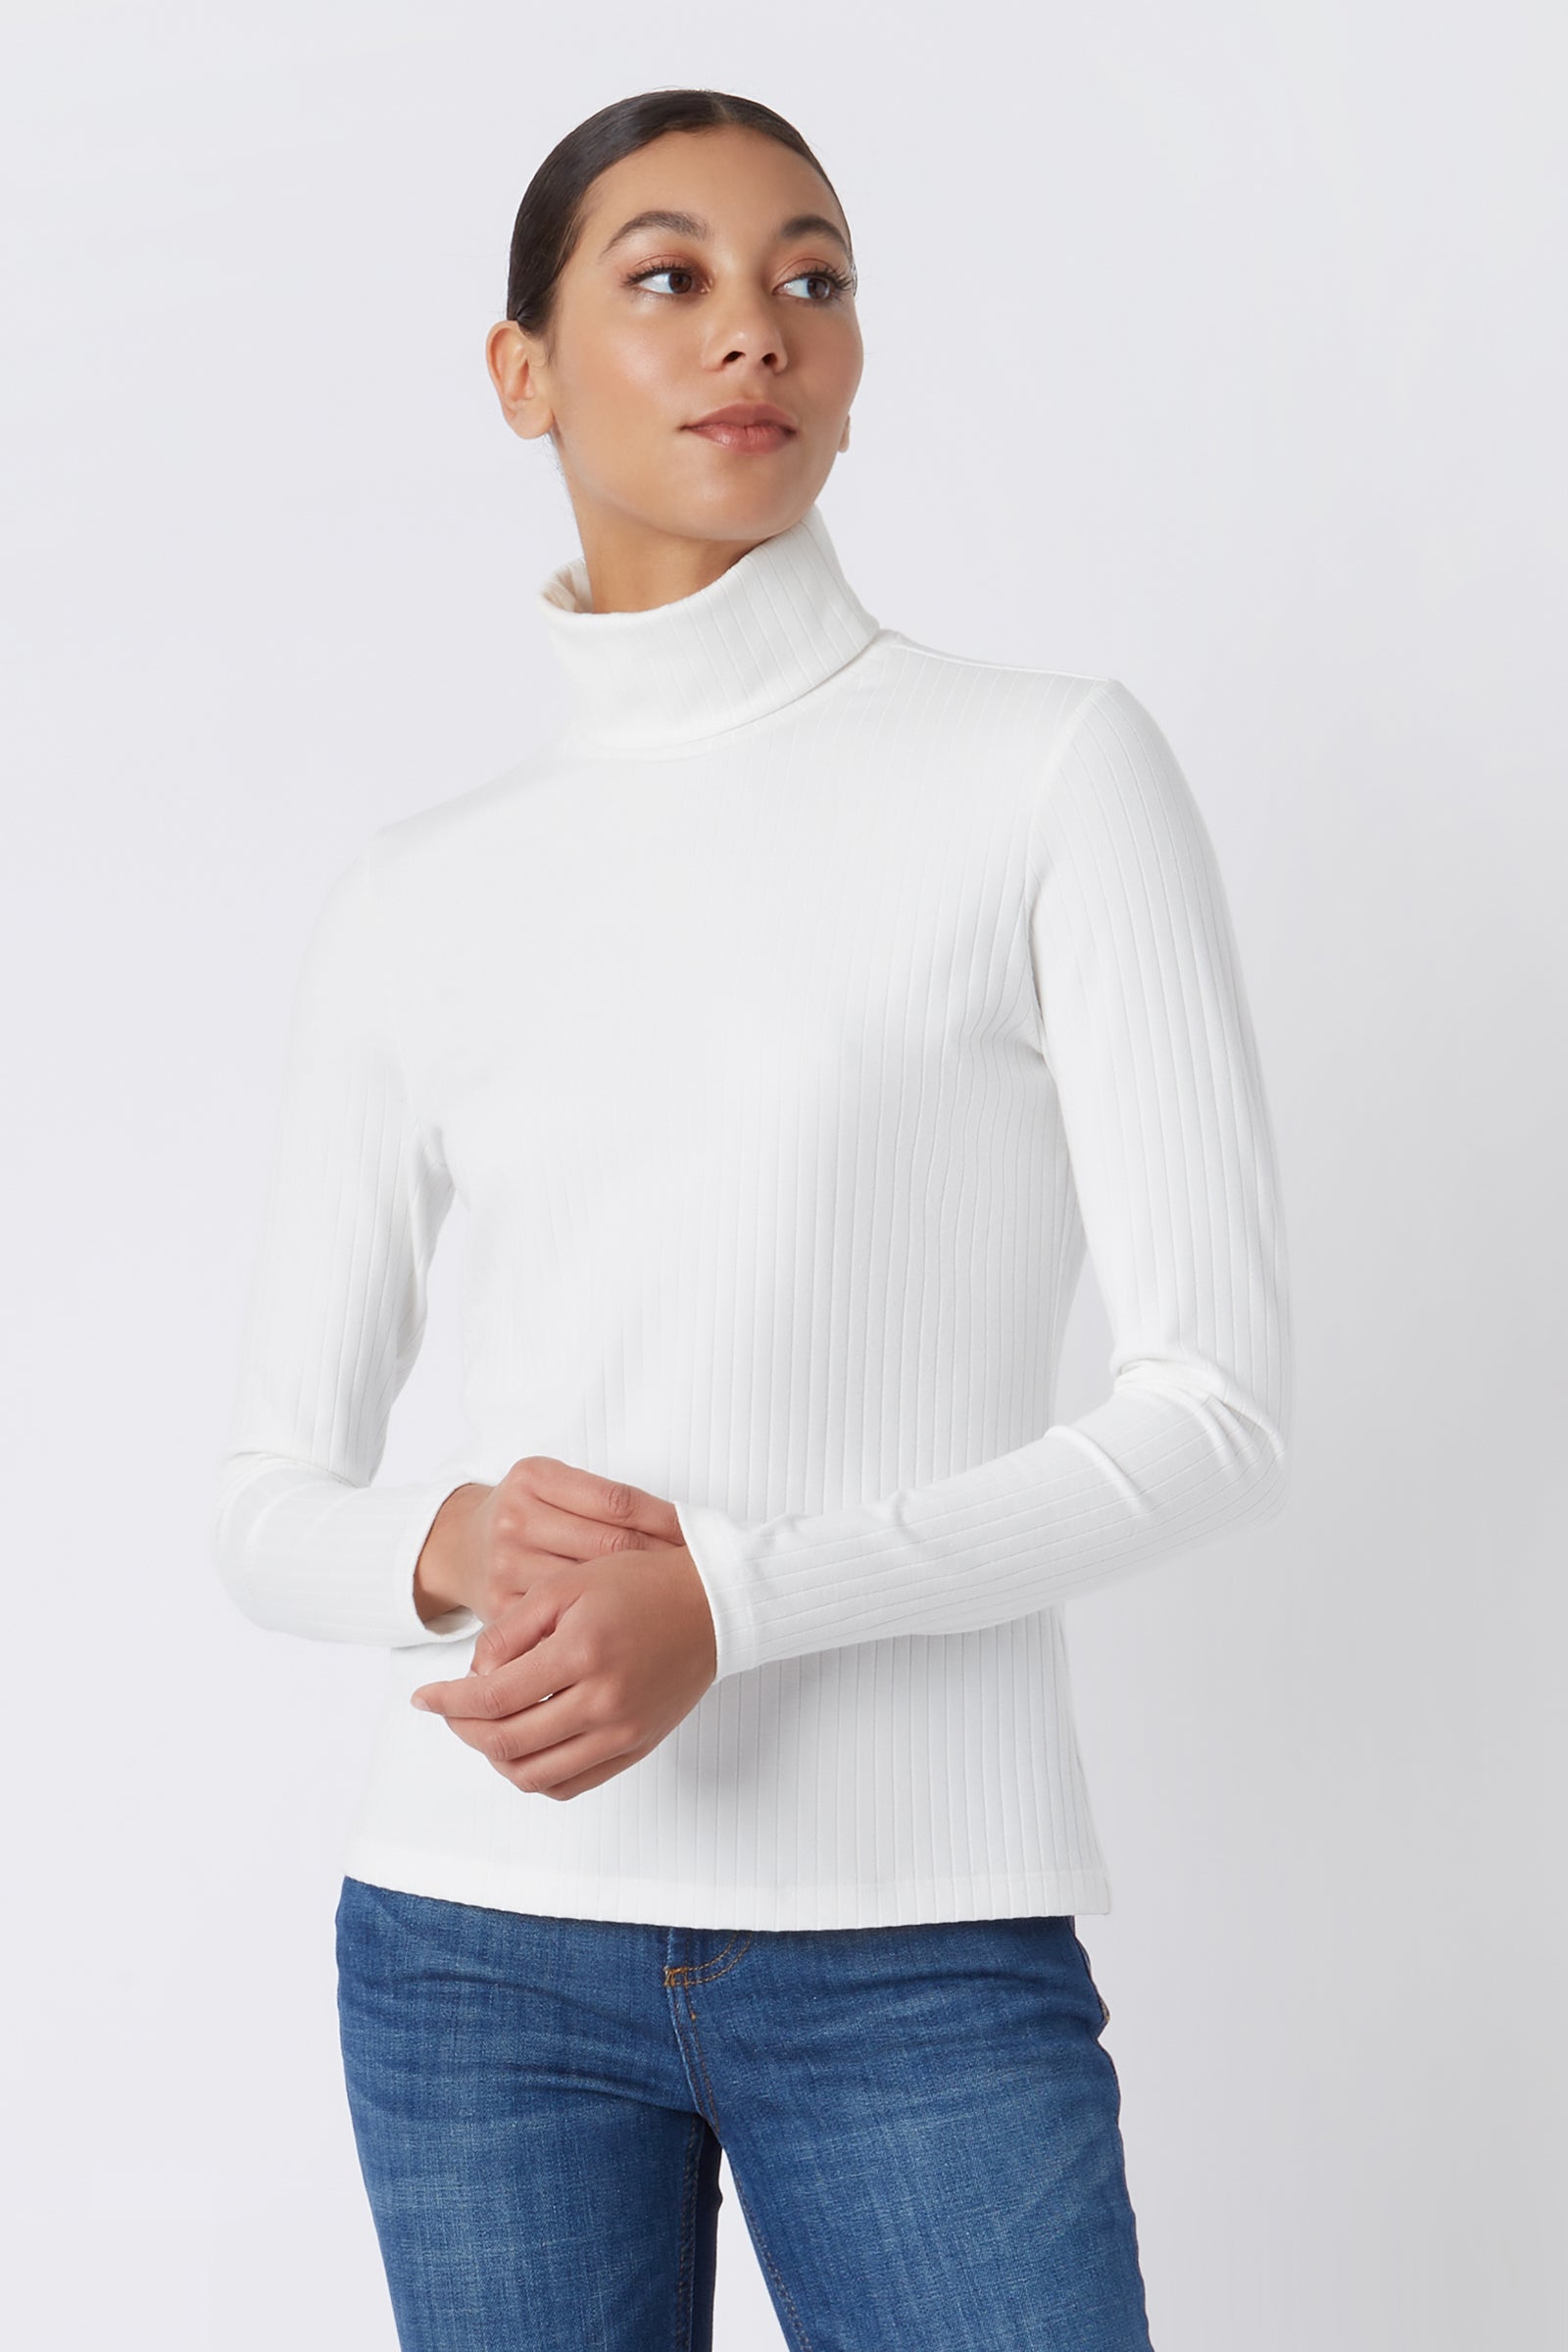 Kal Rieman Alma Rib Tneck in Ivory on Model Looking Left Cropped Front View